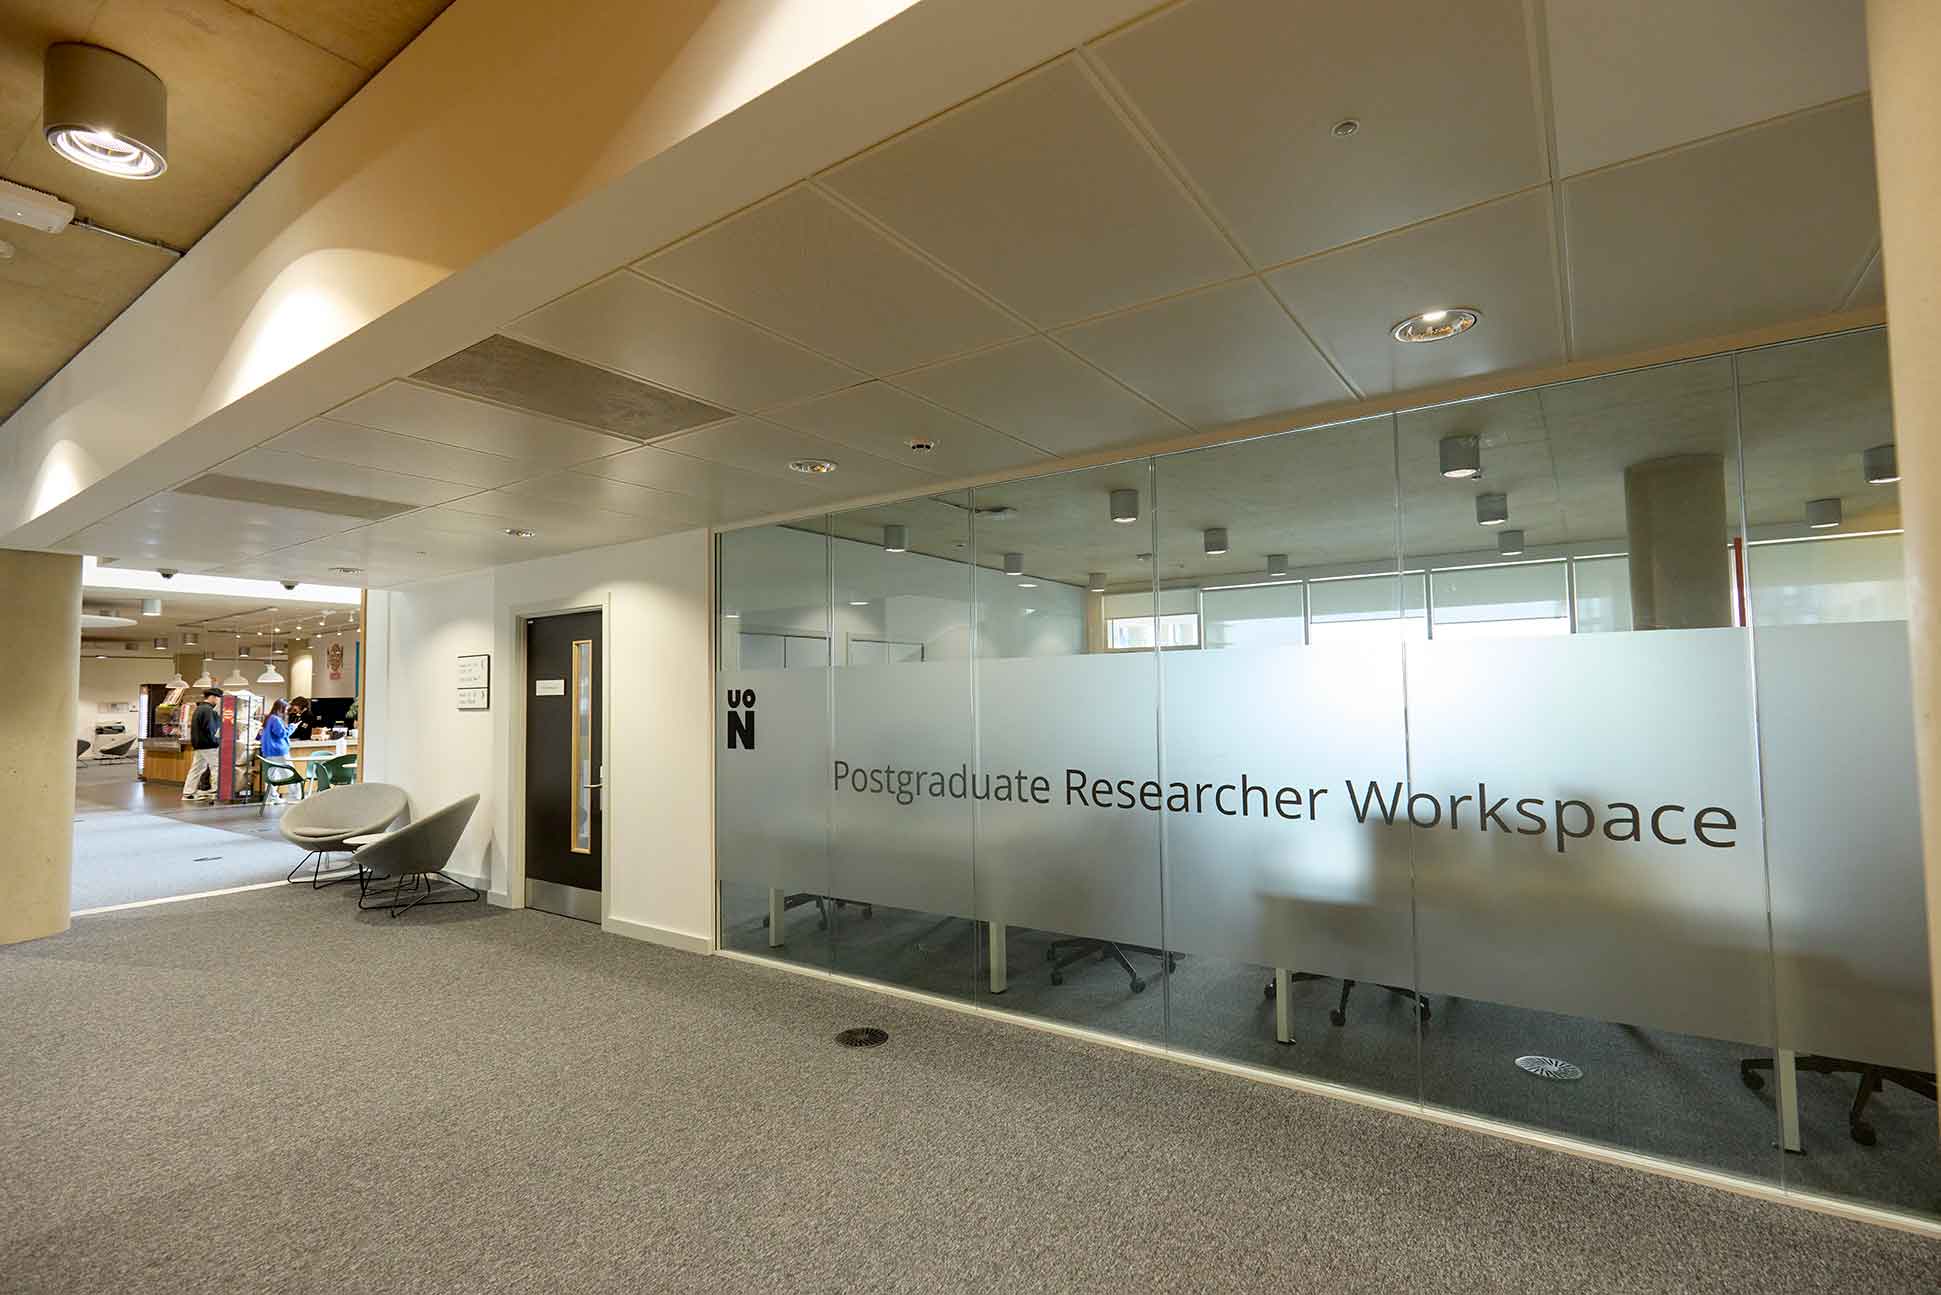 The picture shows the glass wall exterior of the Postgraduate Research Workspace. Through the frosted glass walls there are the outlines of desks and chairs and a window beyond